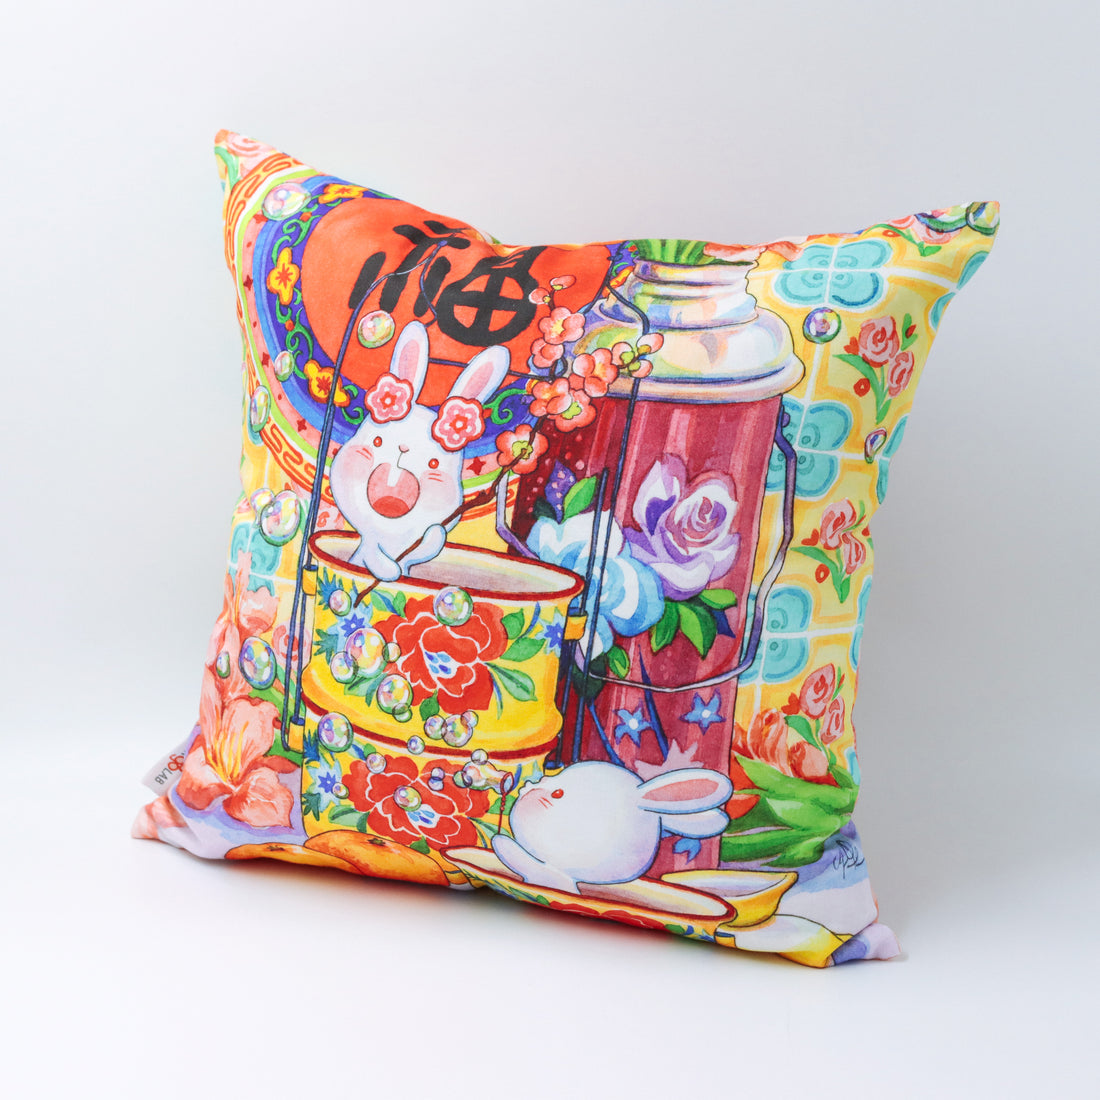 Bunny-ful Year | Cushion Cover (Square) CNY 2023